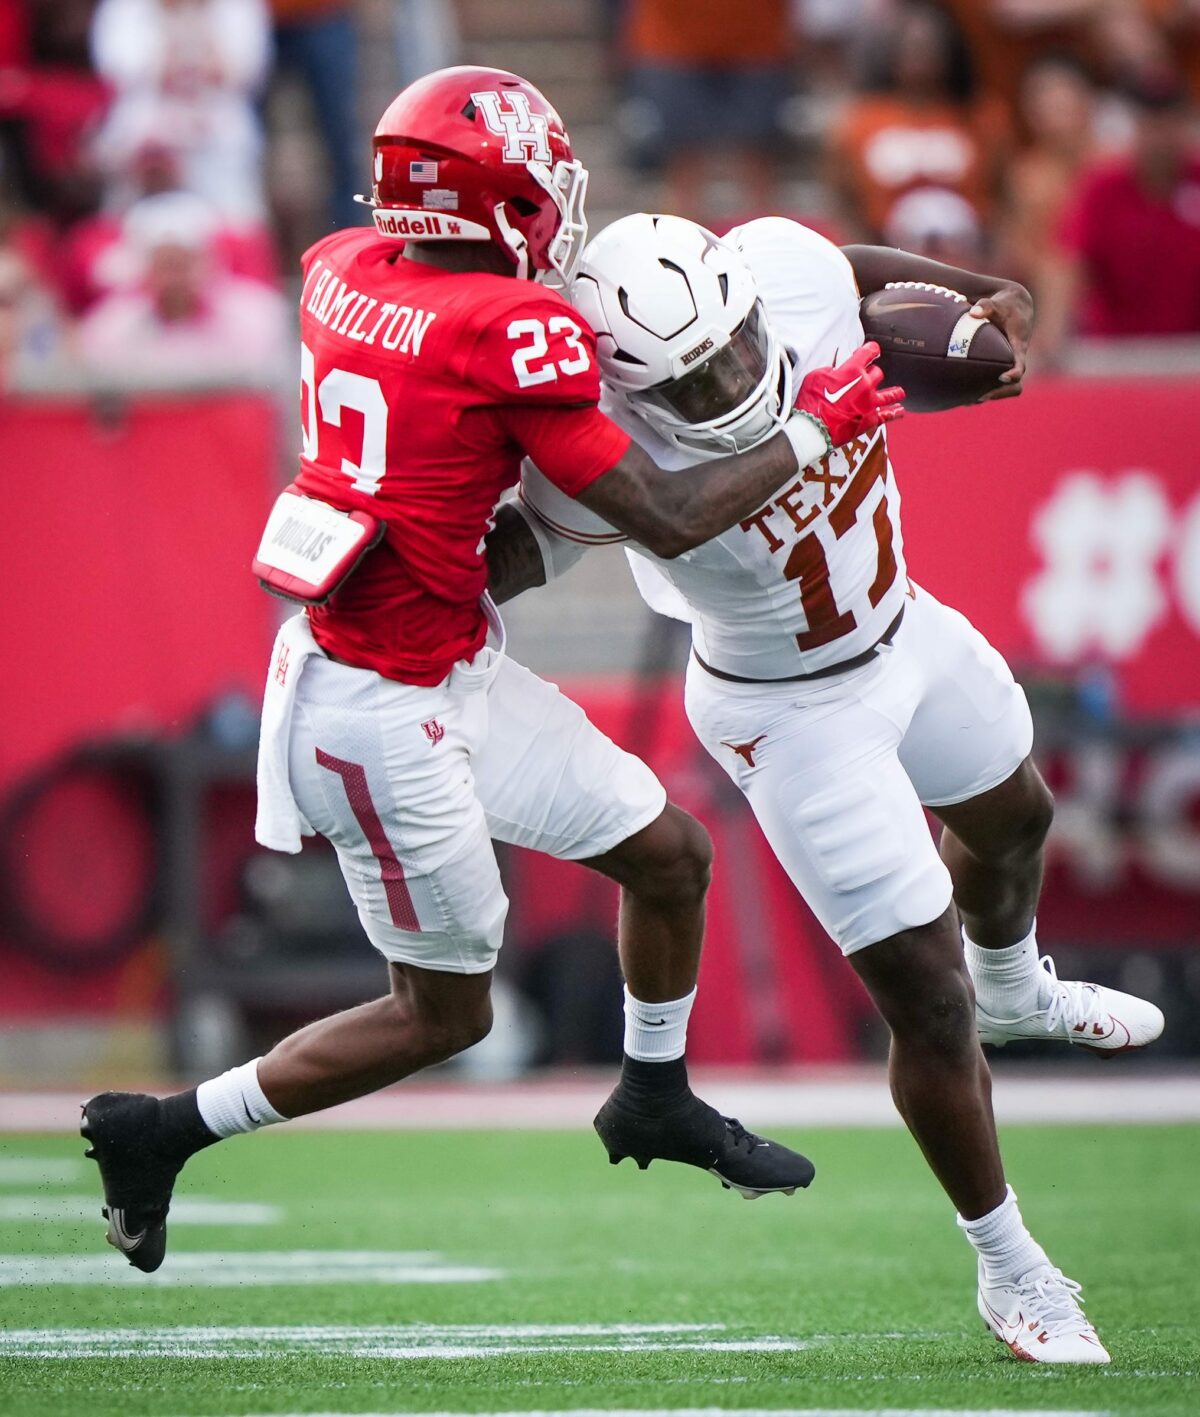 Experts predict Saturday’s game between Texas and BYU